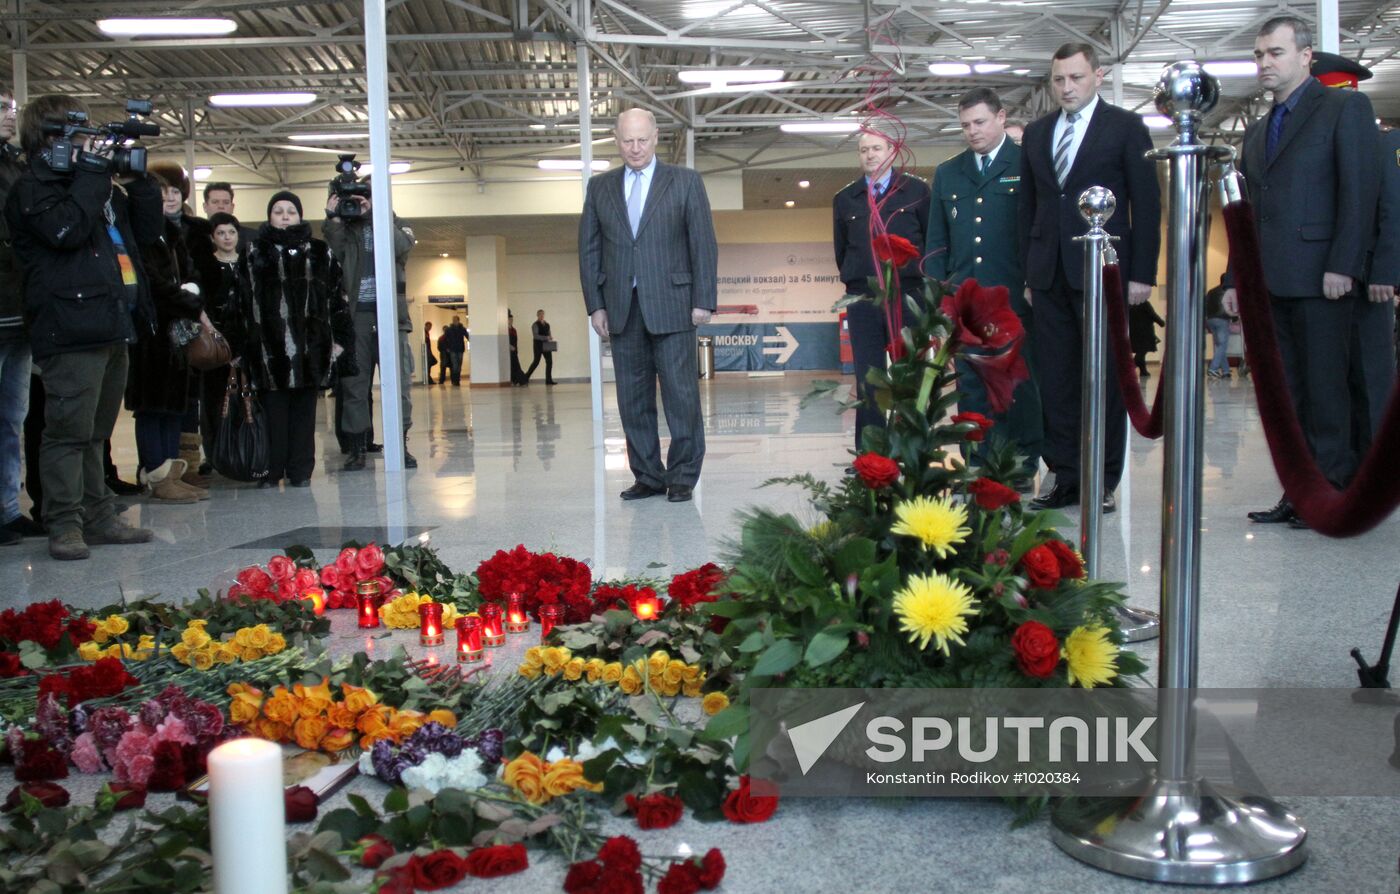 One year since terrorist attack at Domodedovo Airport